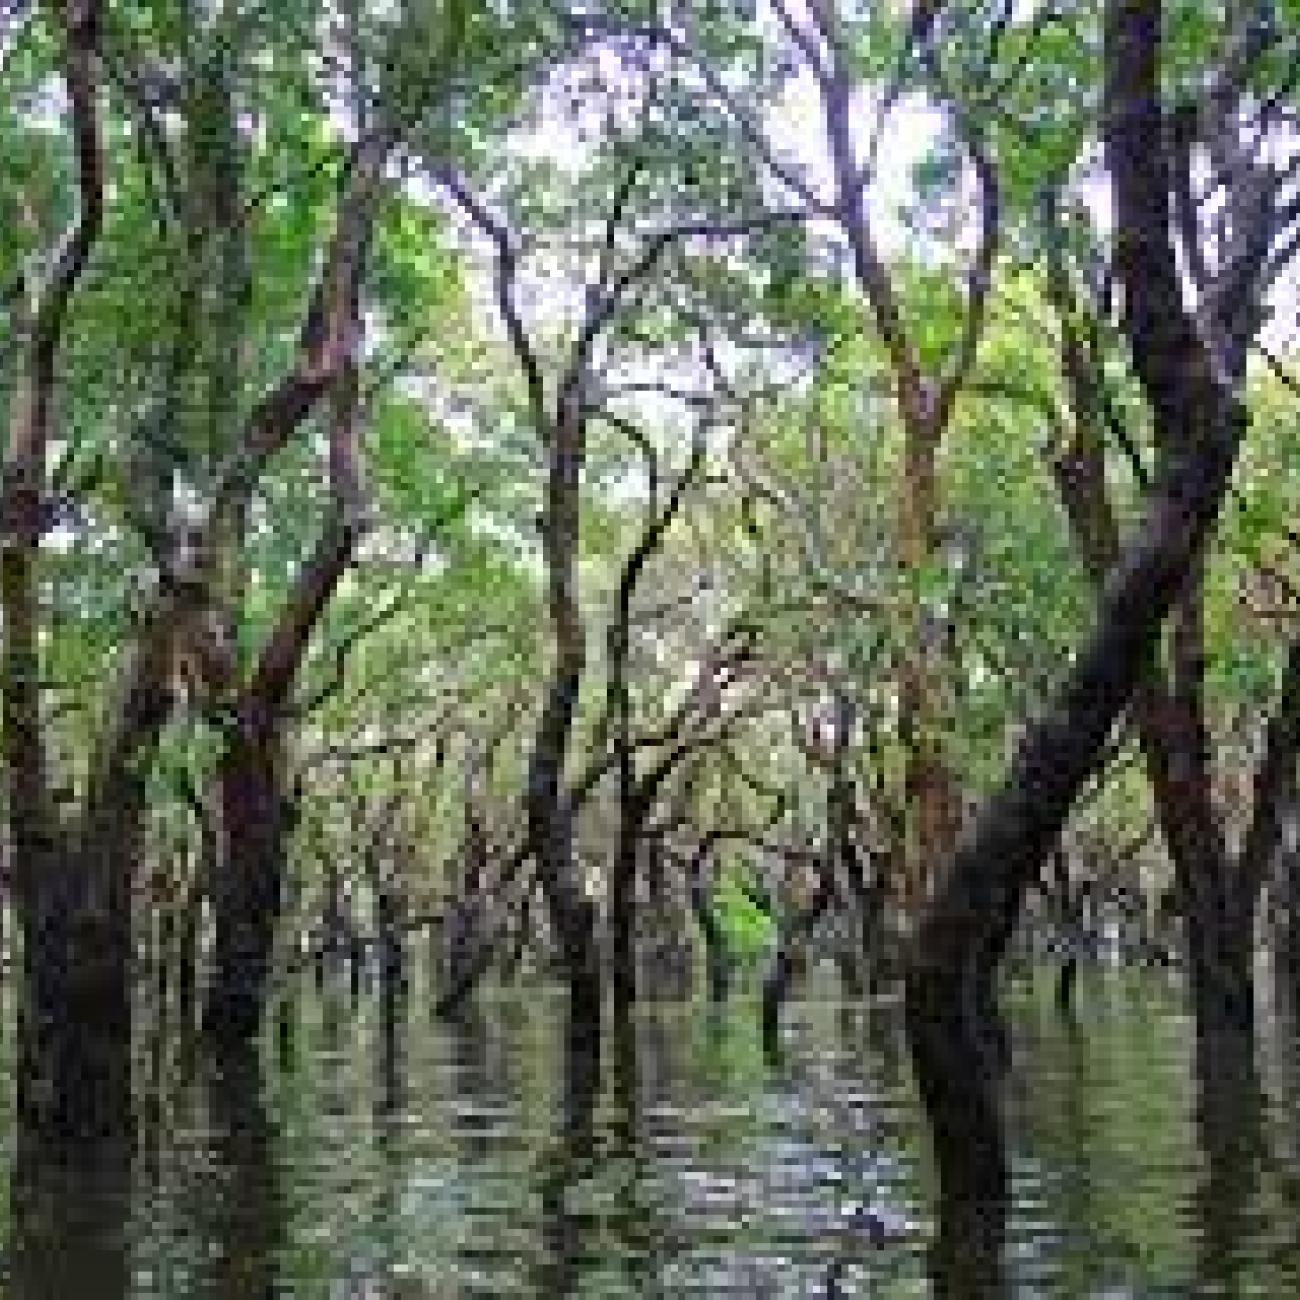 Impact of Climate Change on Mangrove Forests